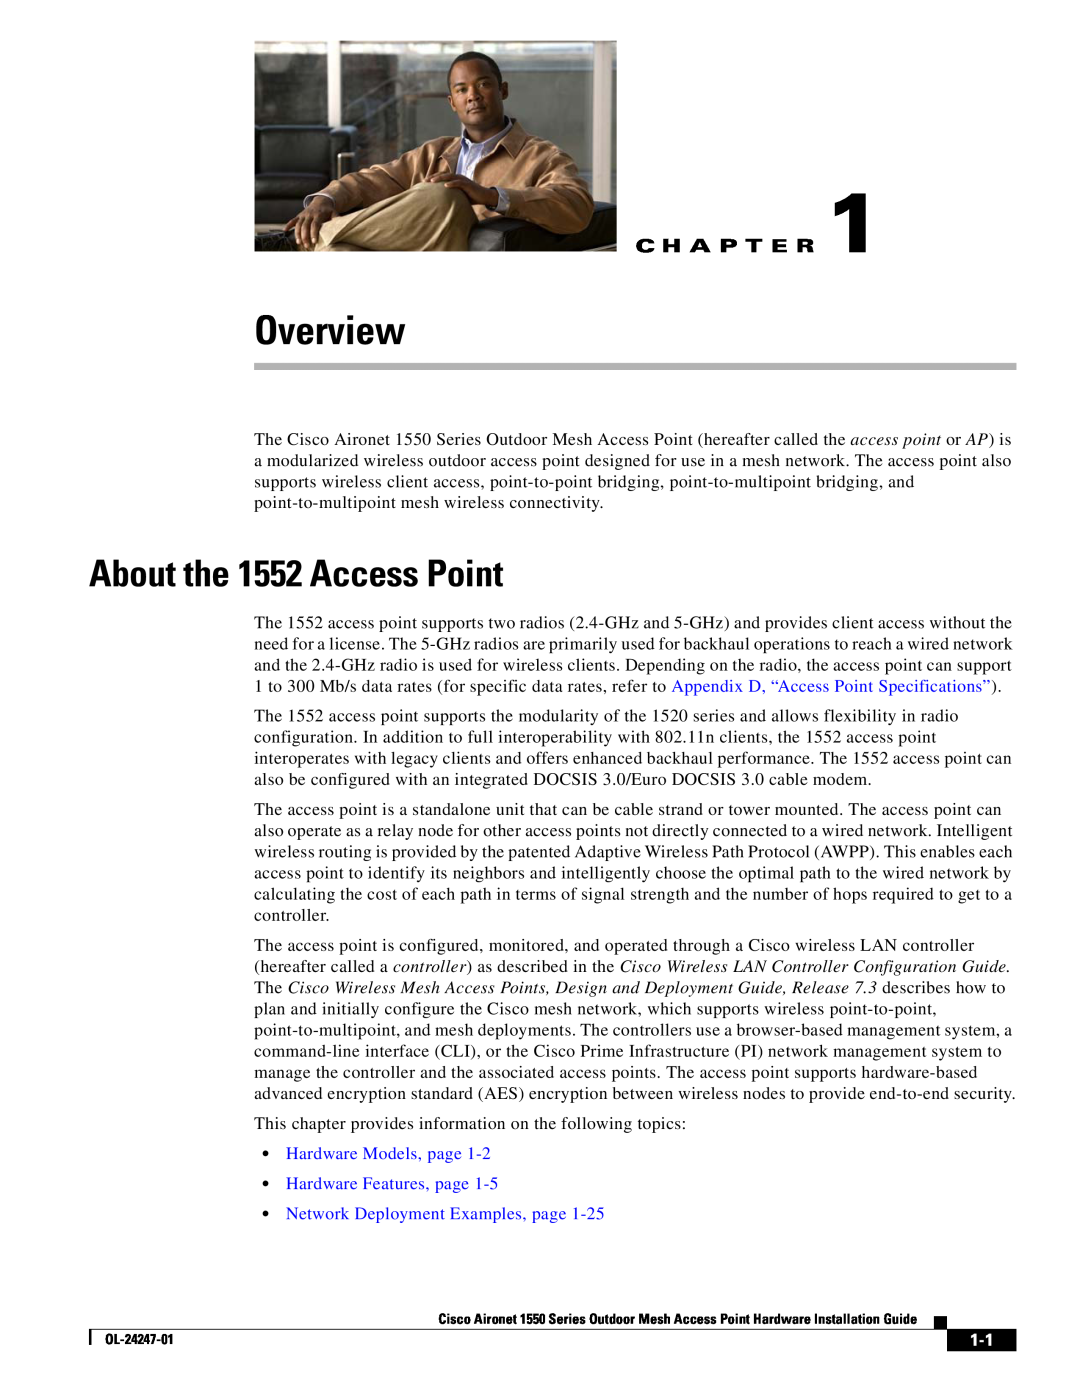 Cisco Systems AIRCAP1552EUAK9 Overview, About the 1552 Access Point, C H A P T E R, Network Deployment Examples, page 